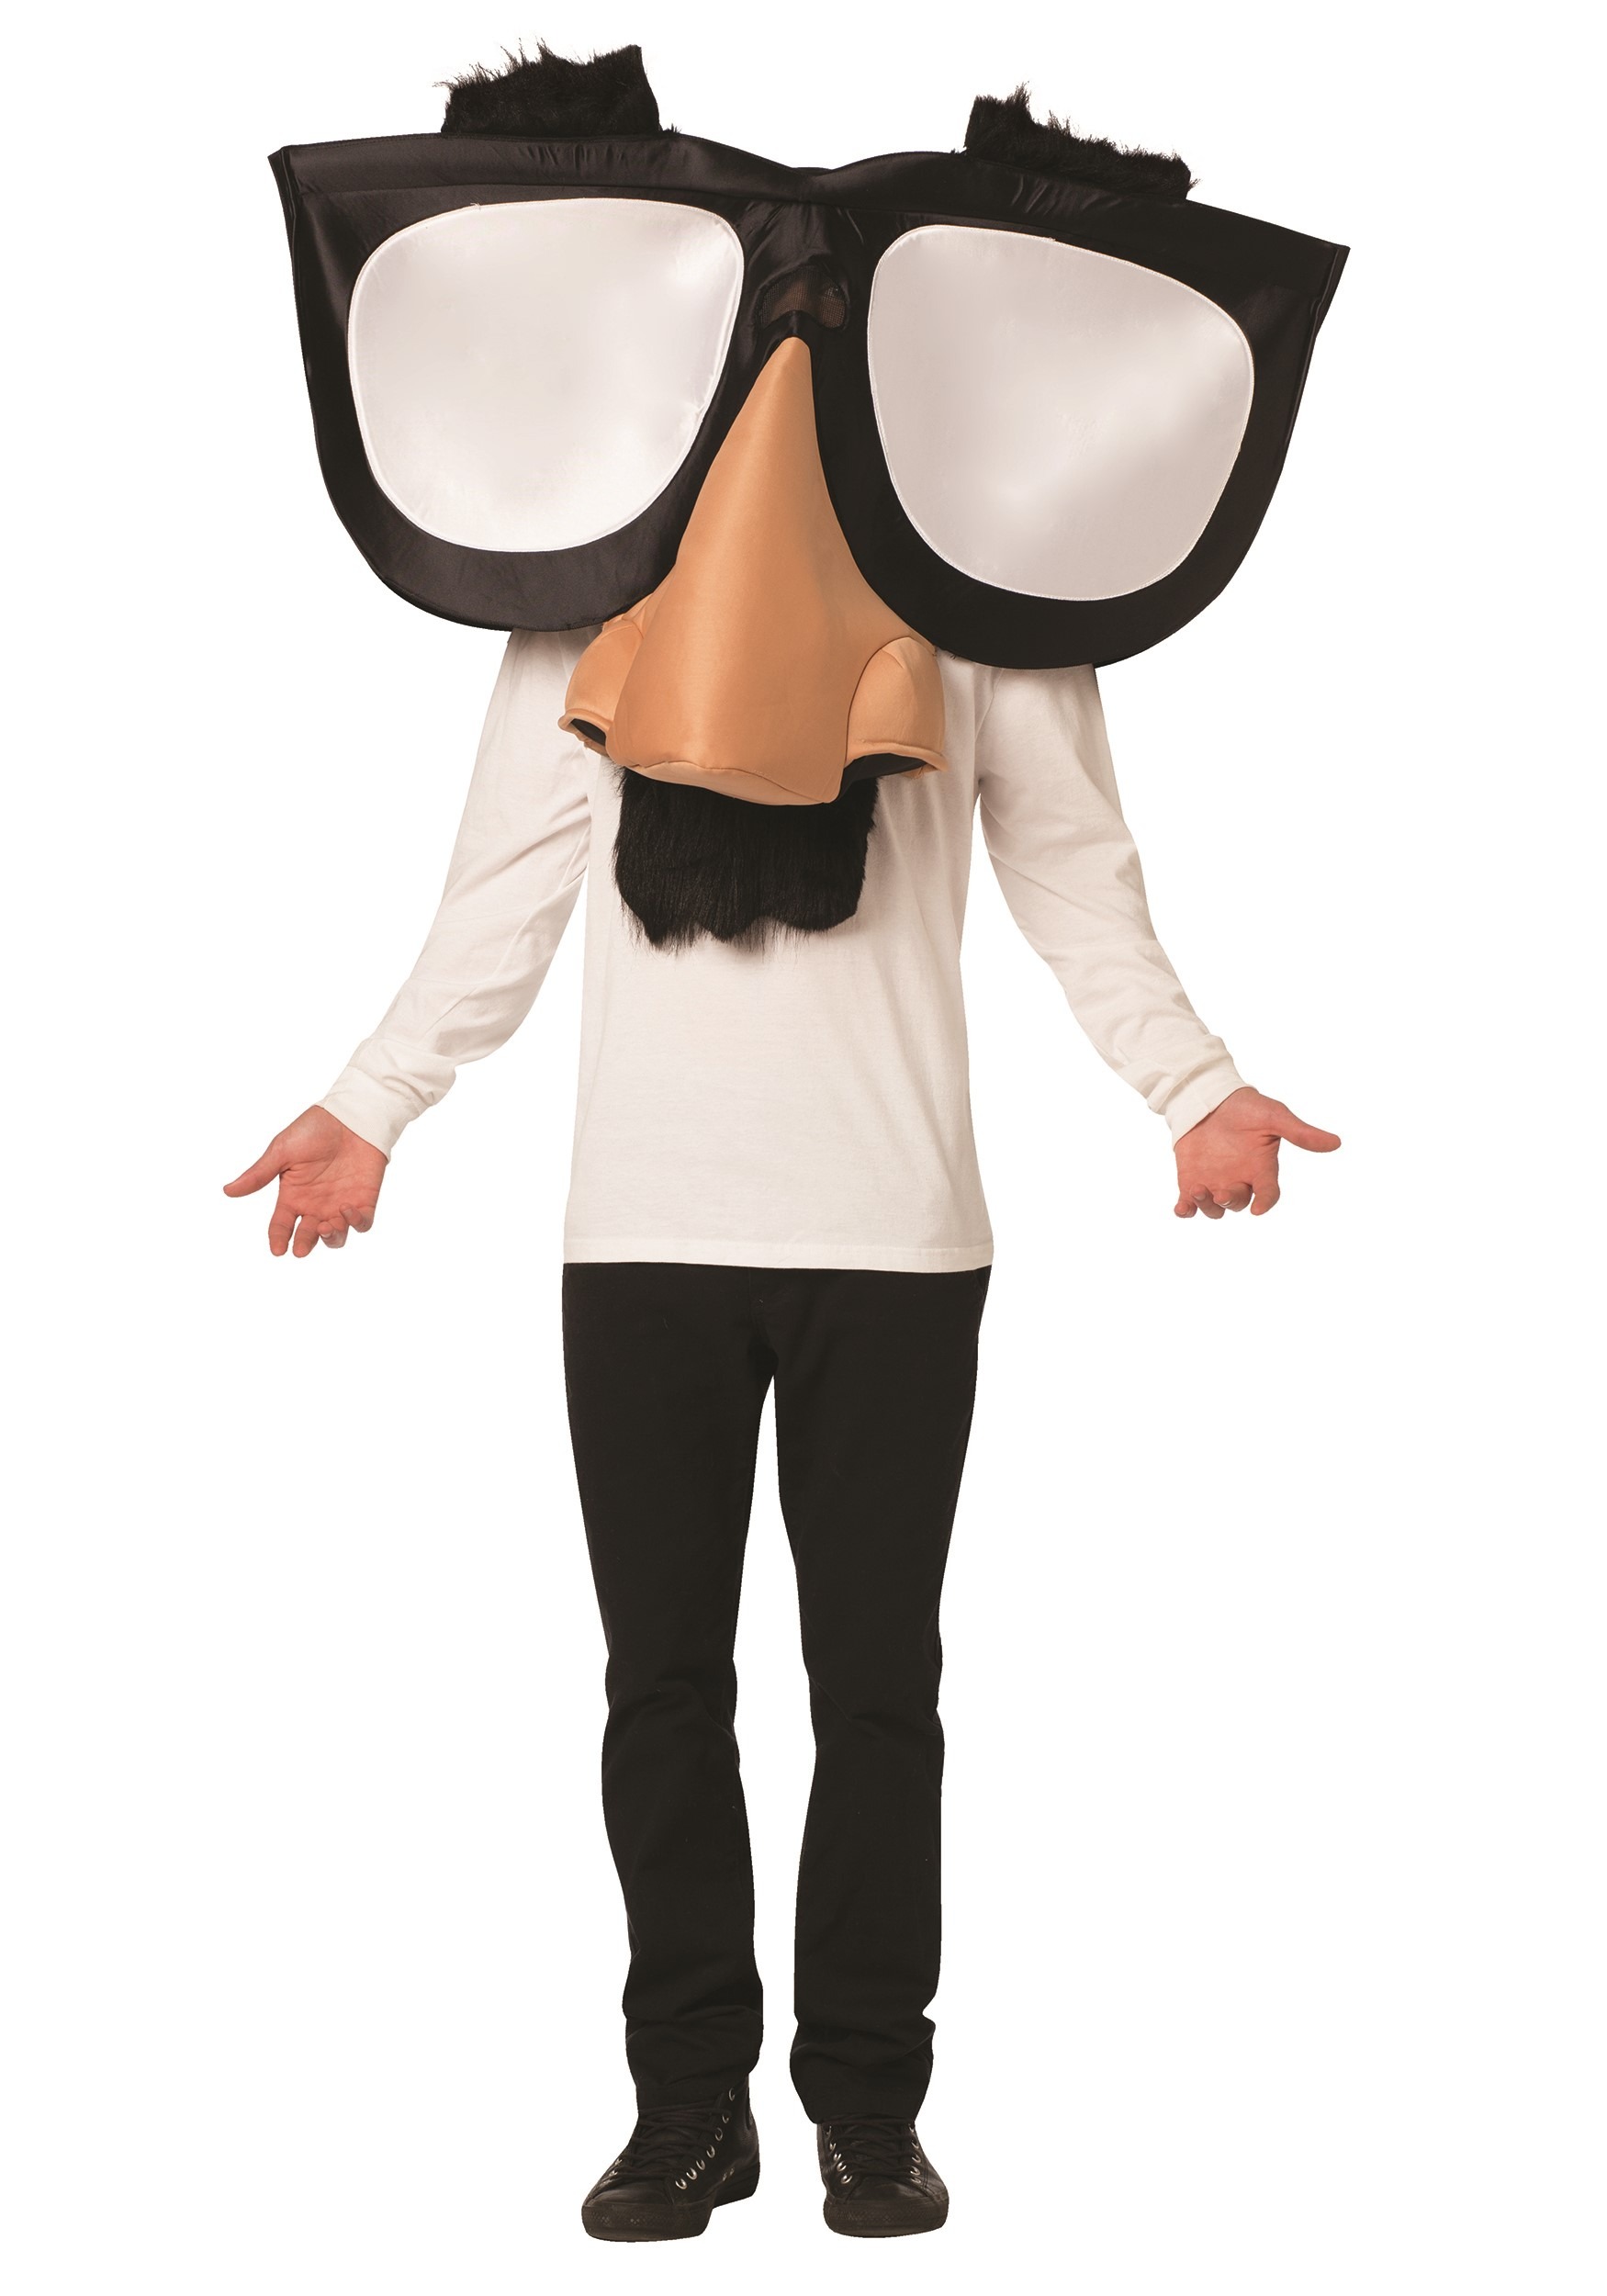 Classic Fuzzy Big Nose and Glasses Costume Accessory 